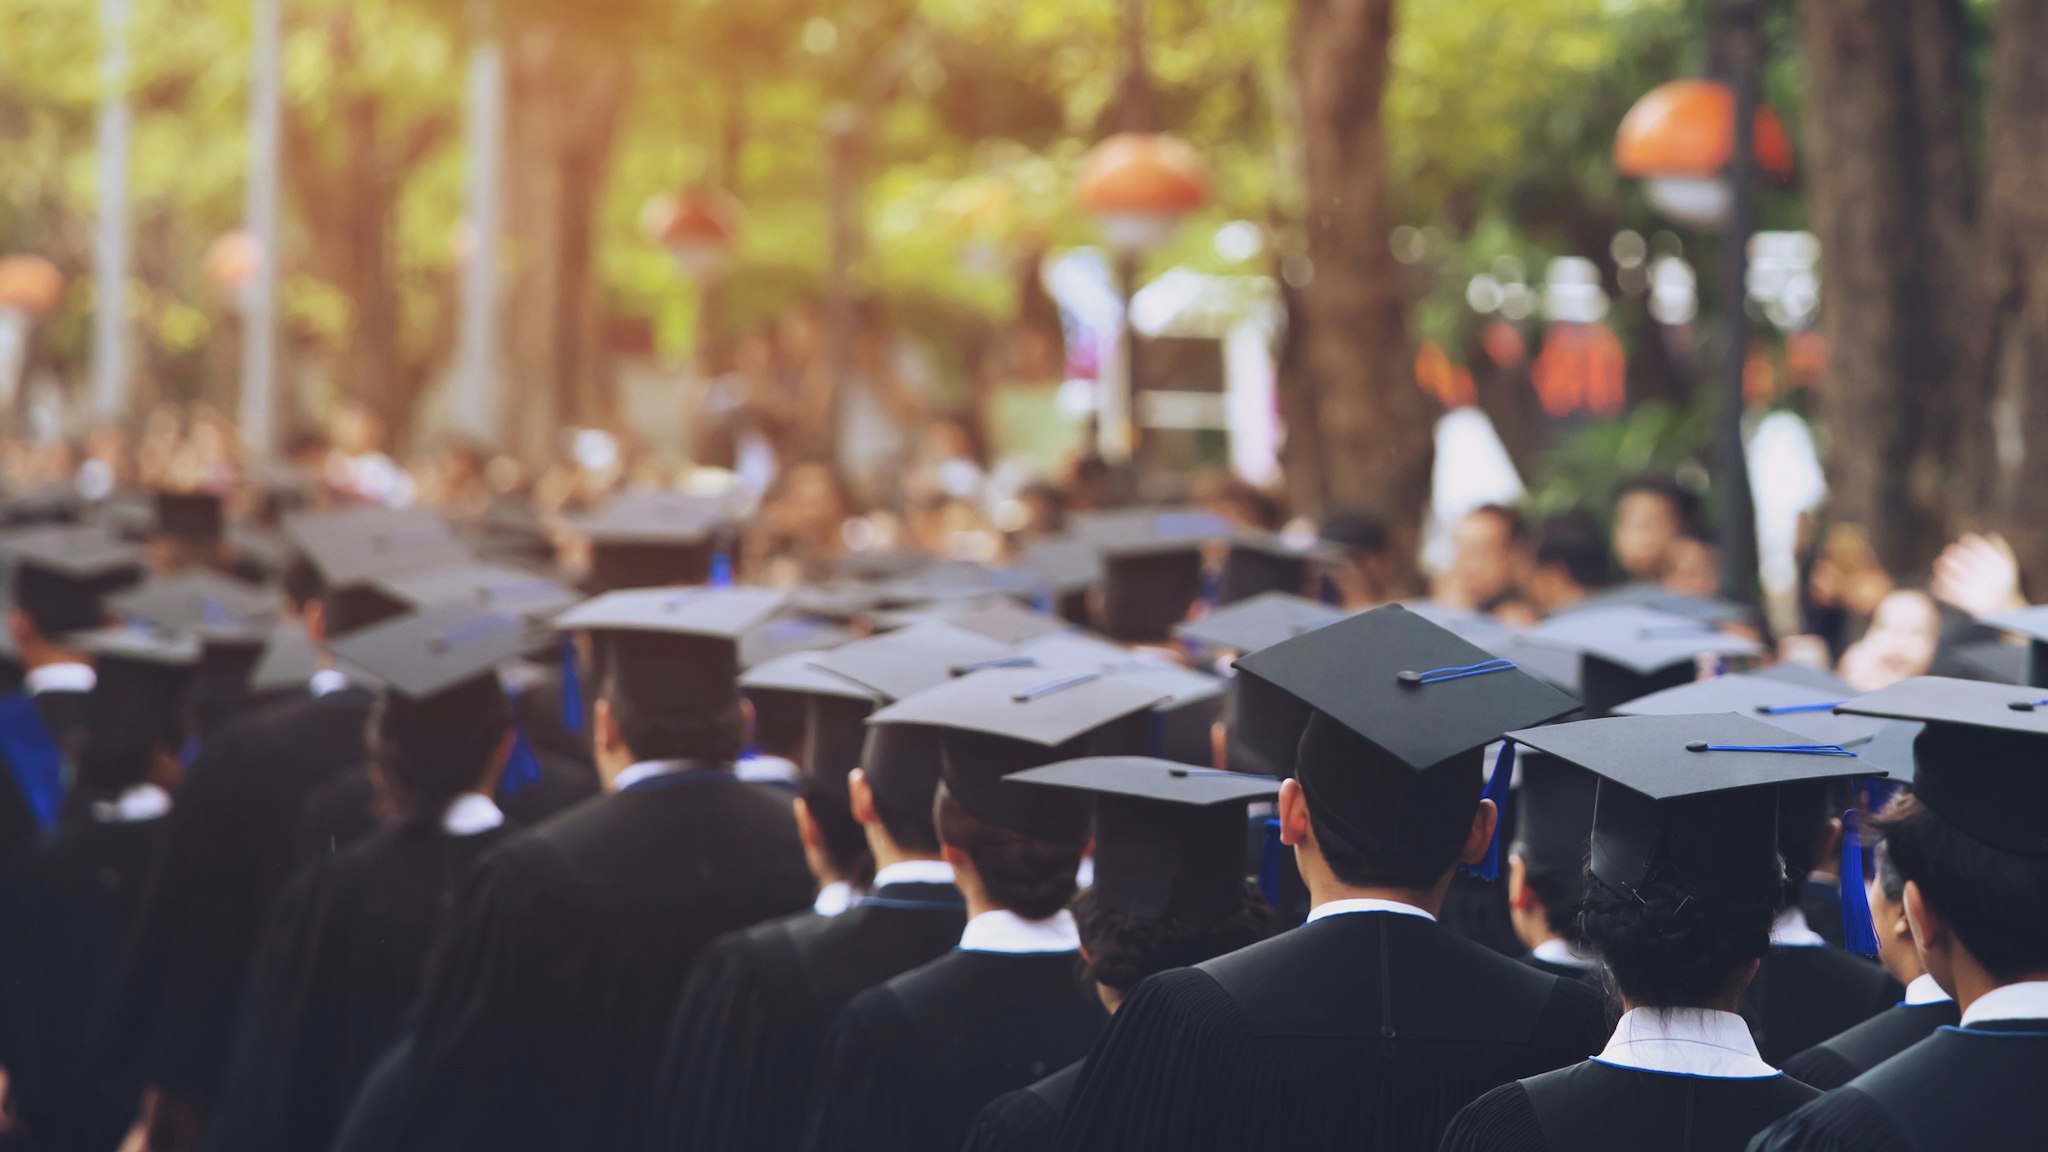 Rear View Of Students Wearing Mortarboard Standing Outdoors - stock photo